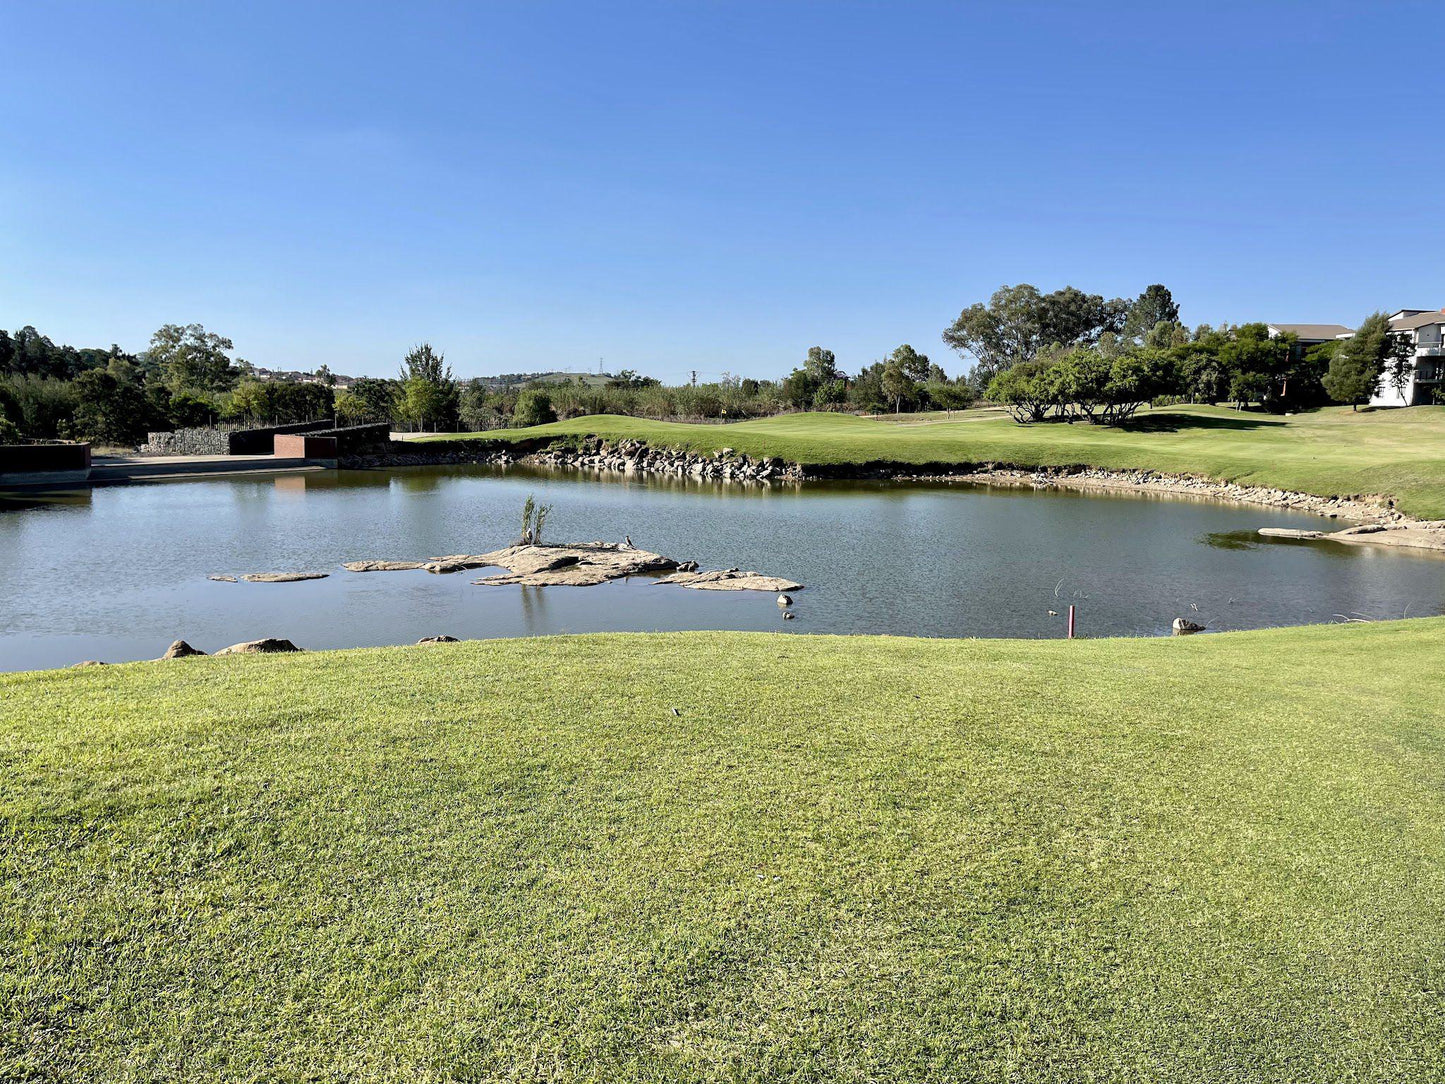 Nature, Complementary Colors, Ball Game, Sport, Golfing, Waters, River, Jackal Creek Golf & Country Club, Club house jackal creek golf estate, roodepoort, johannesburg, 2169